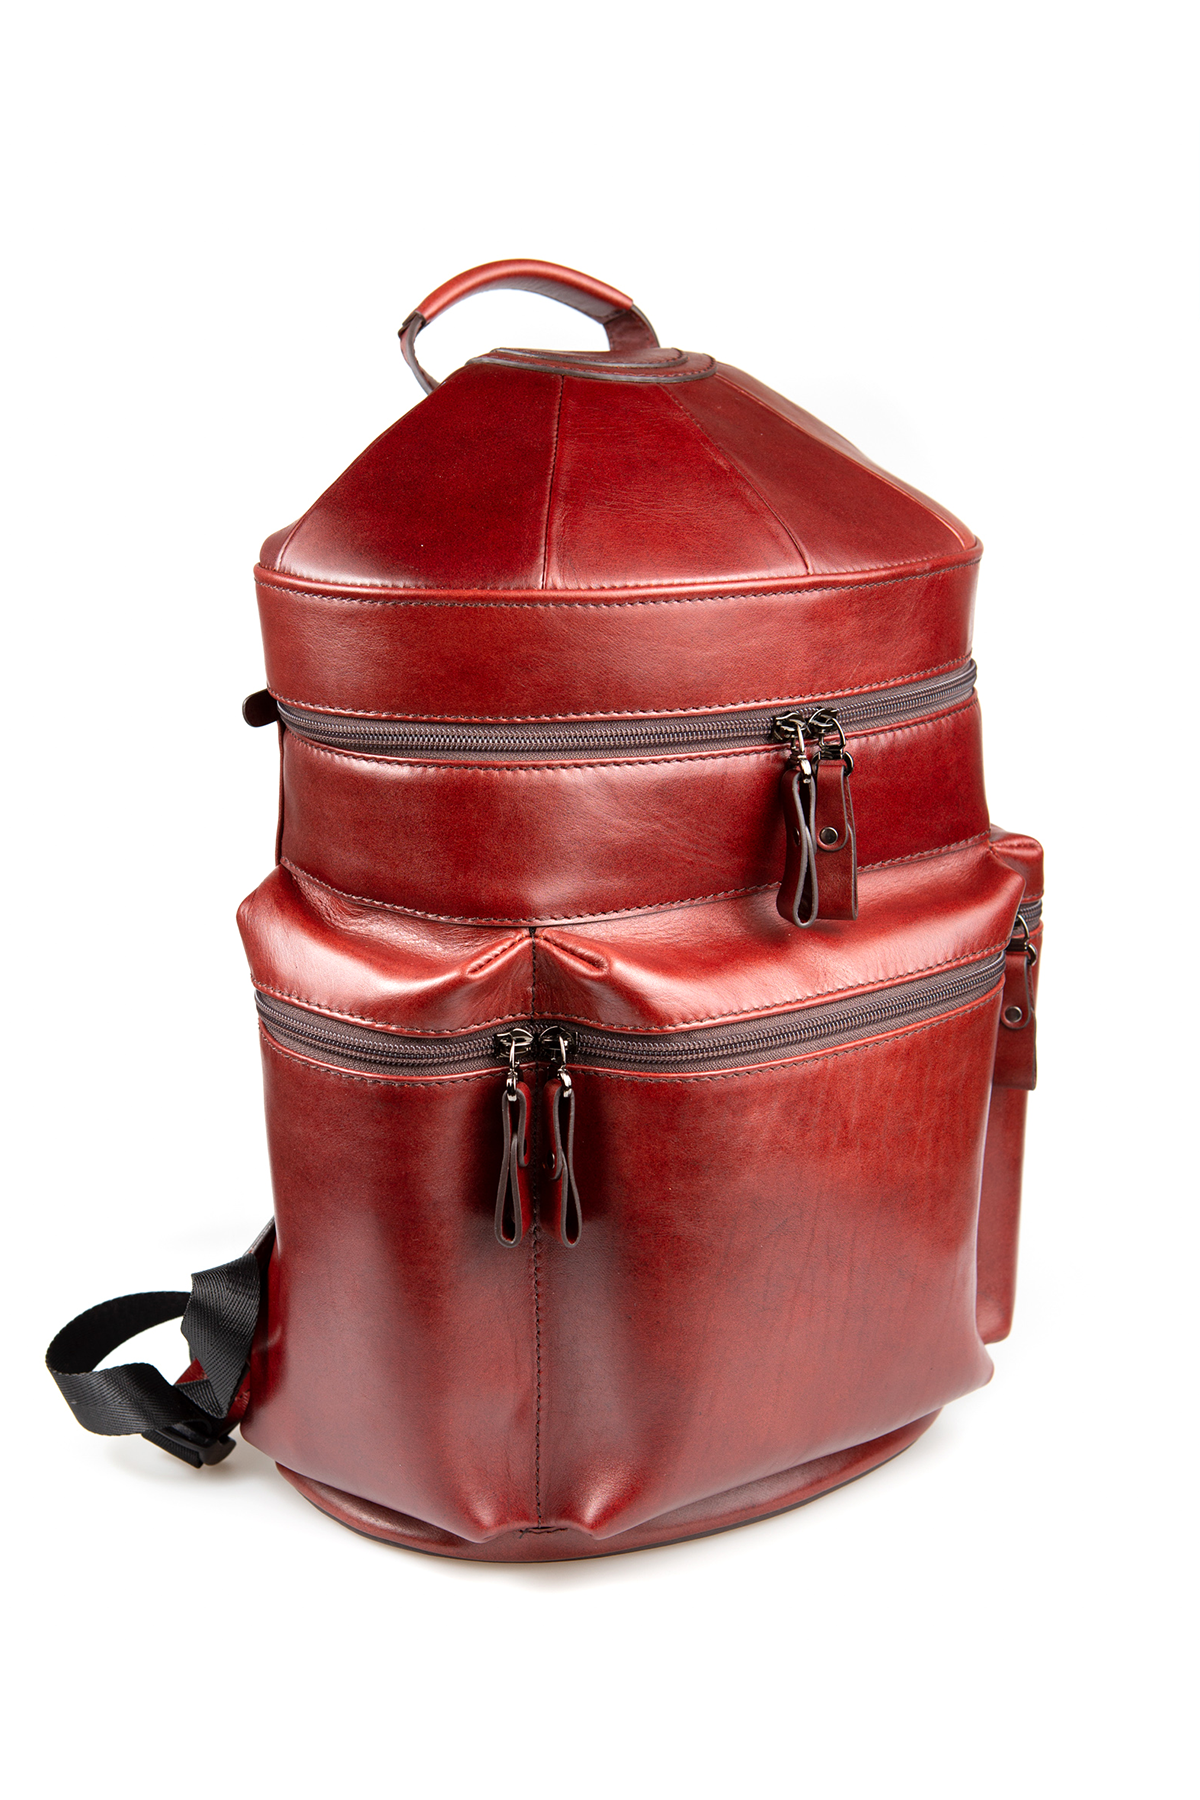 A genuine leather backpack with a yurt design